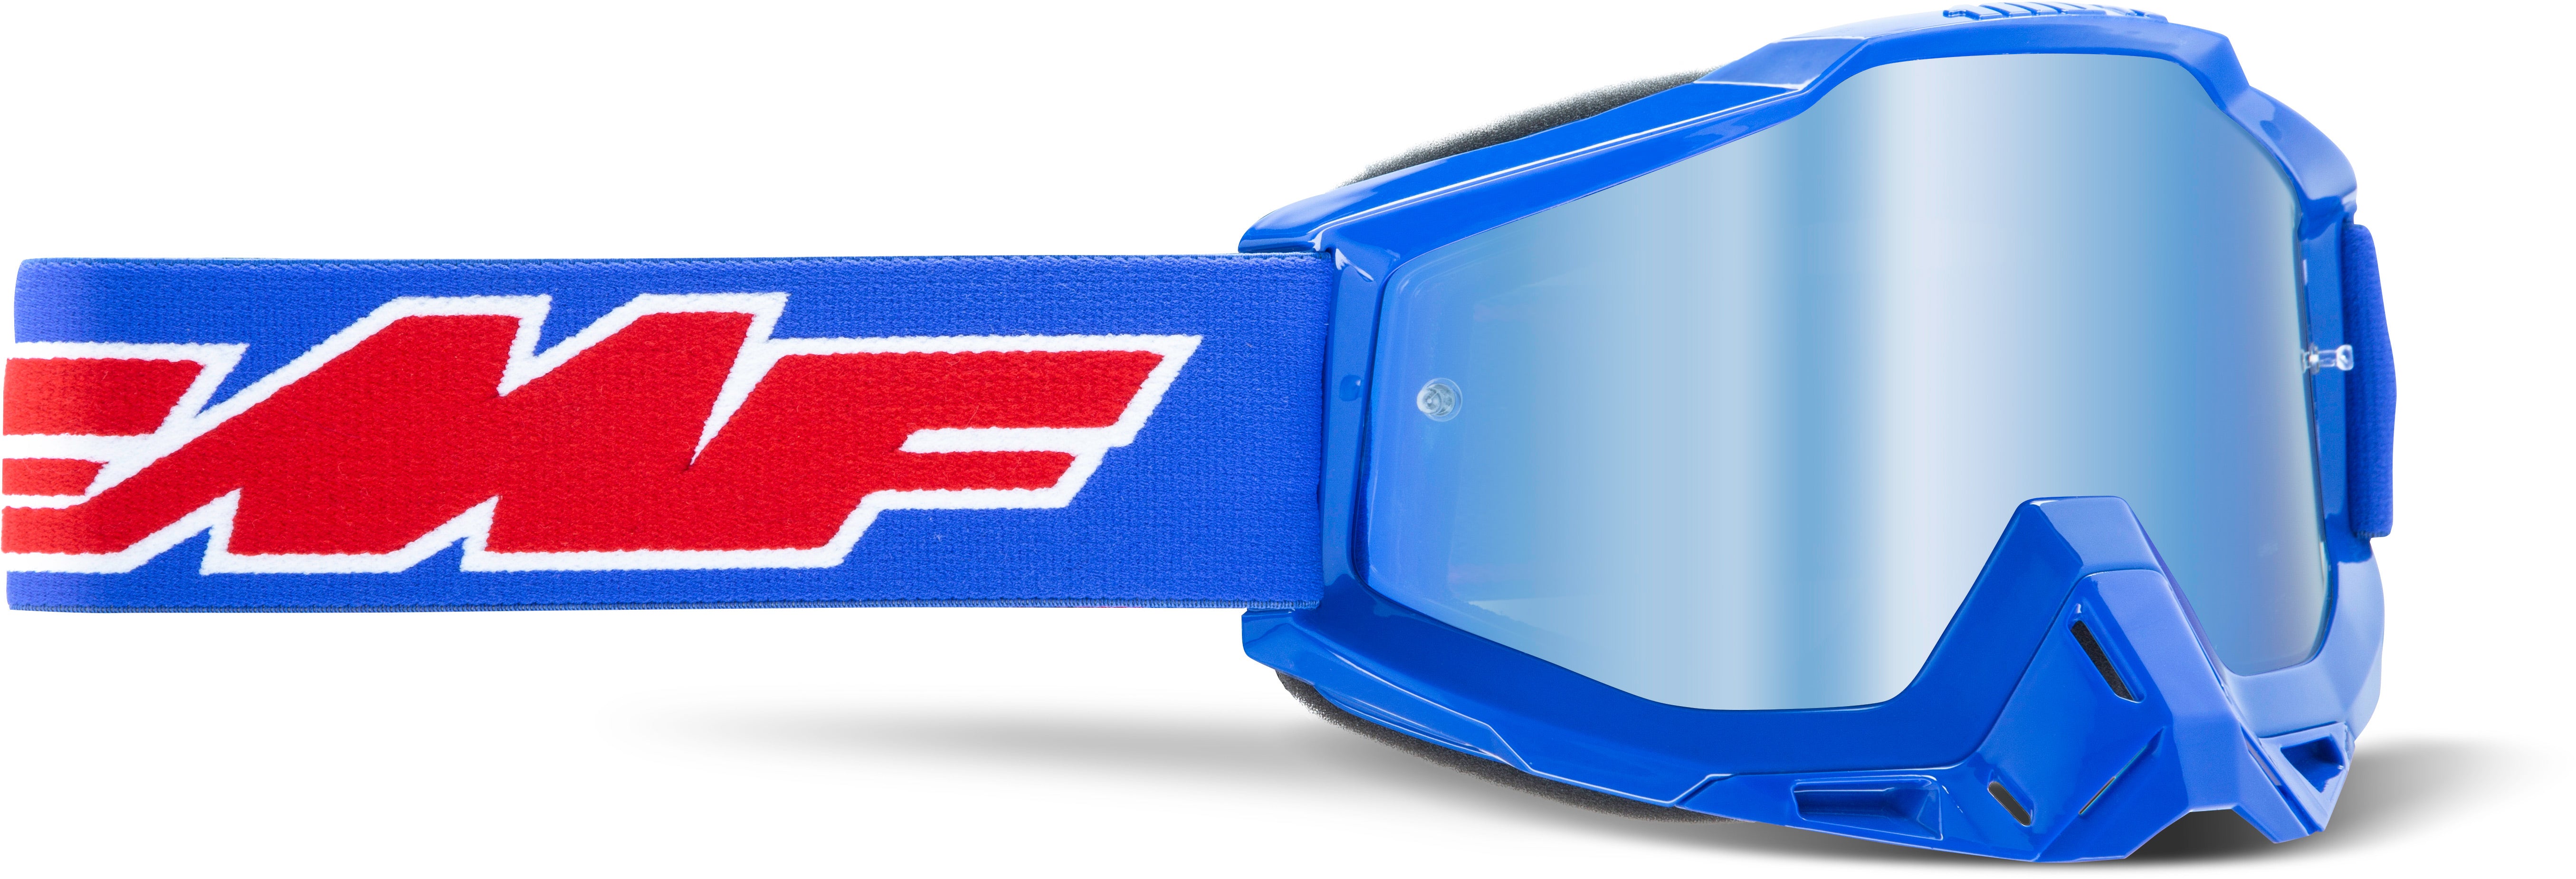 POWERBOMB Goggle Rocket with Blue Mirror and Blue Lens on White Background